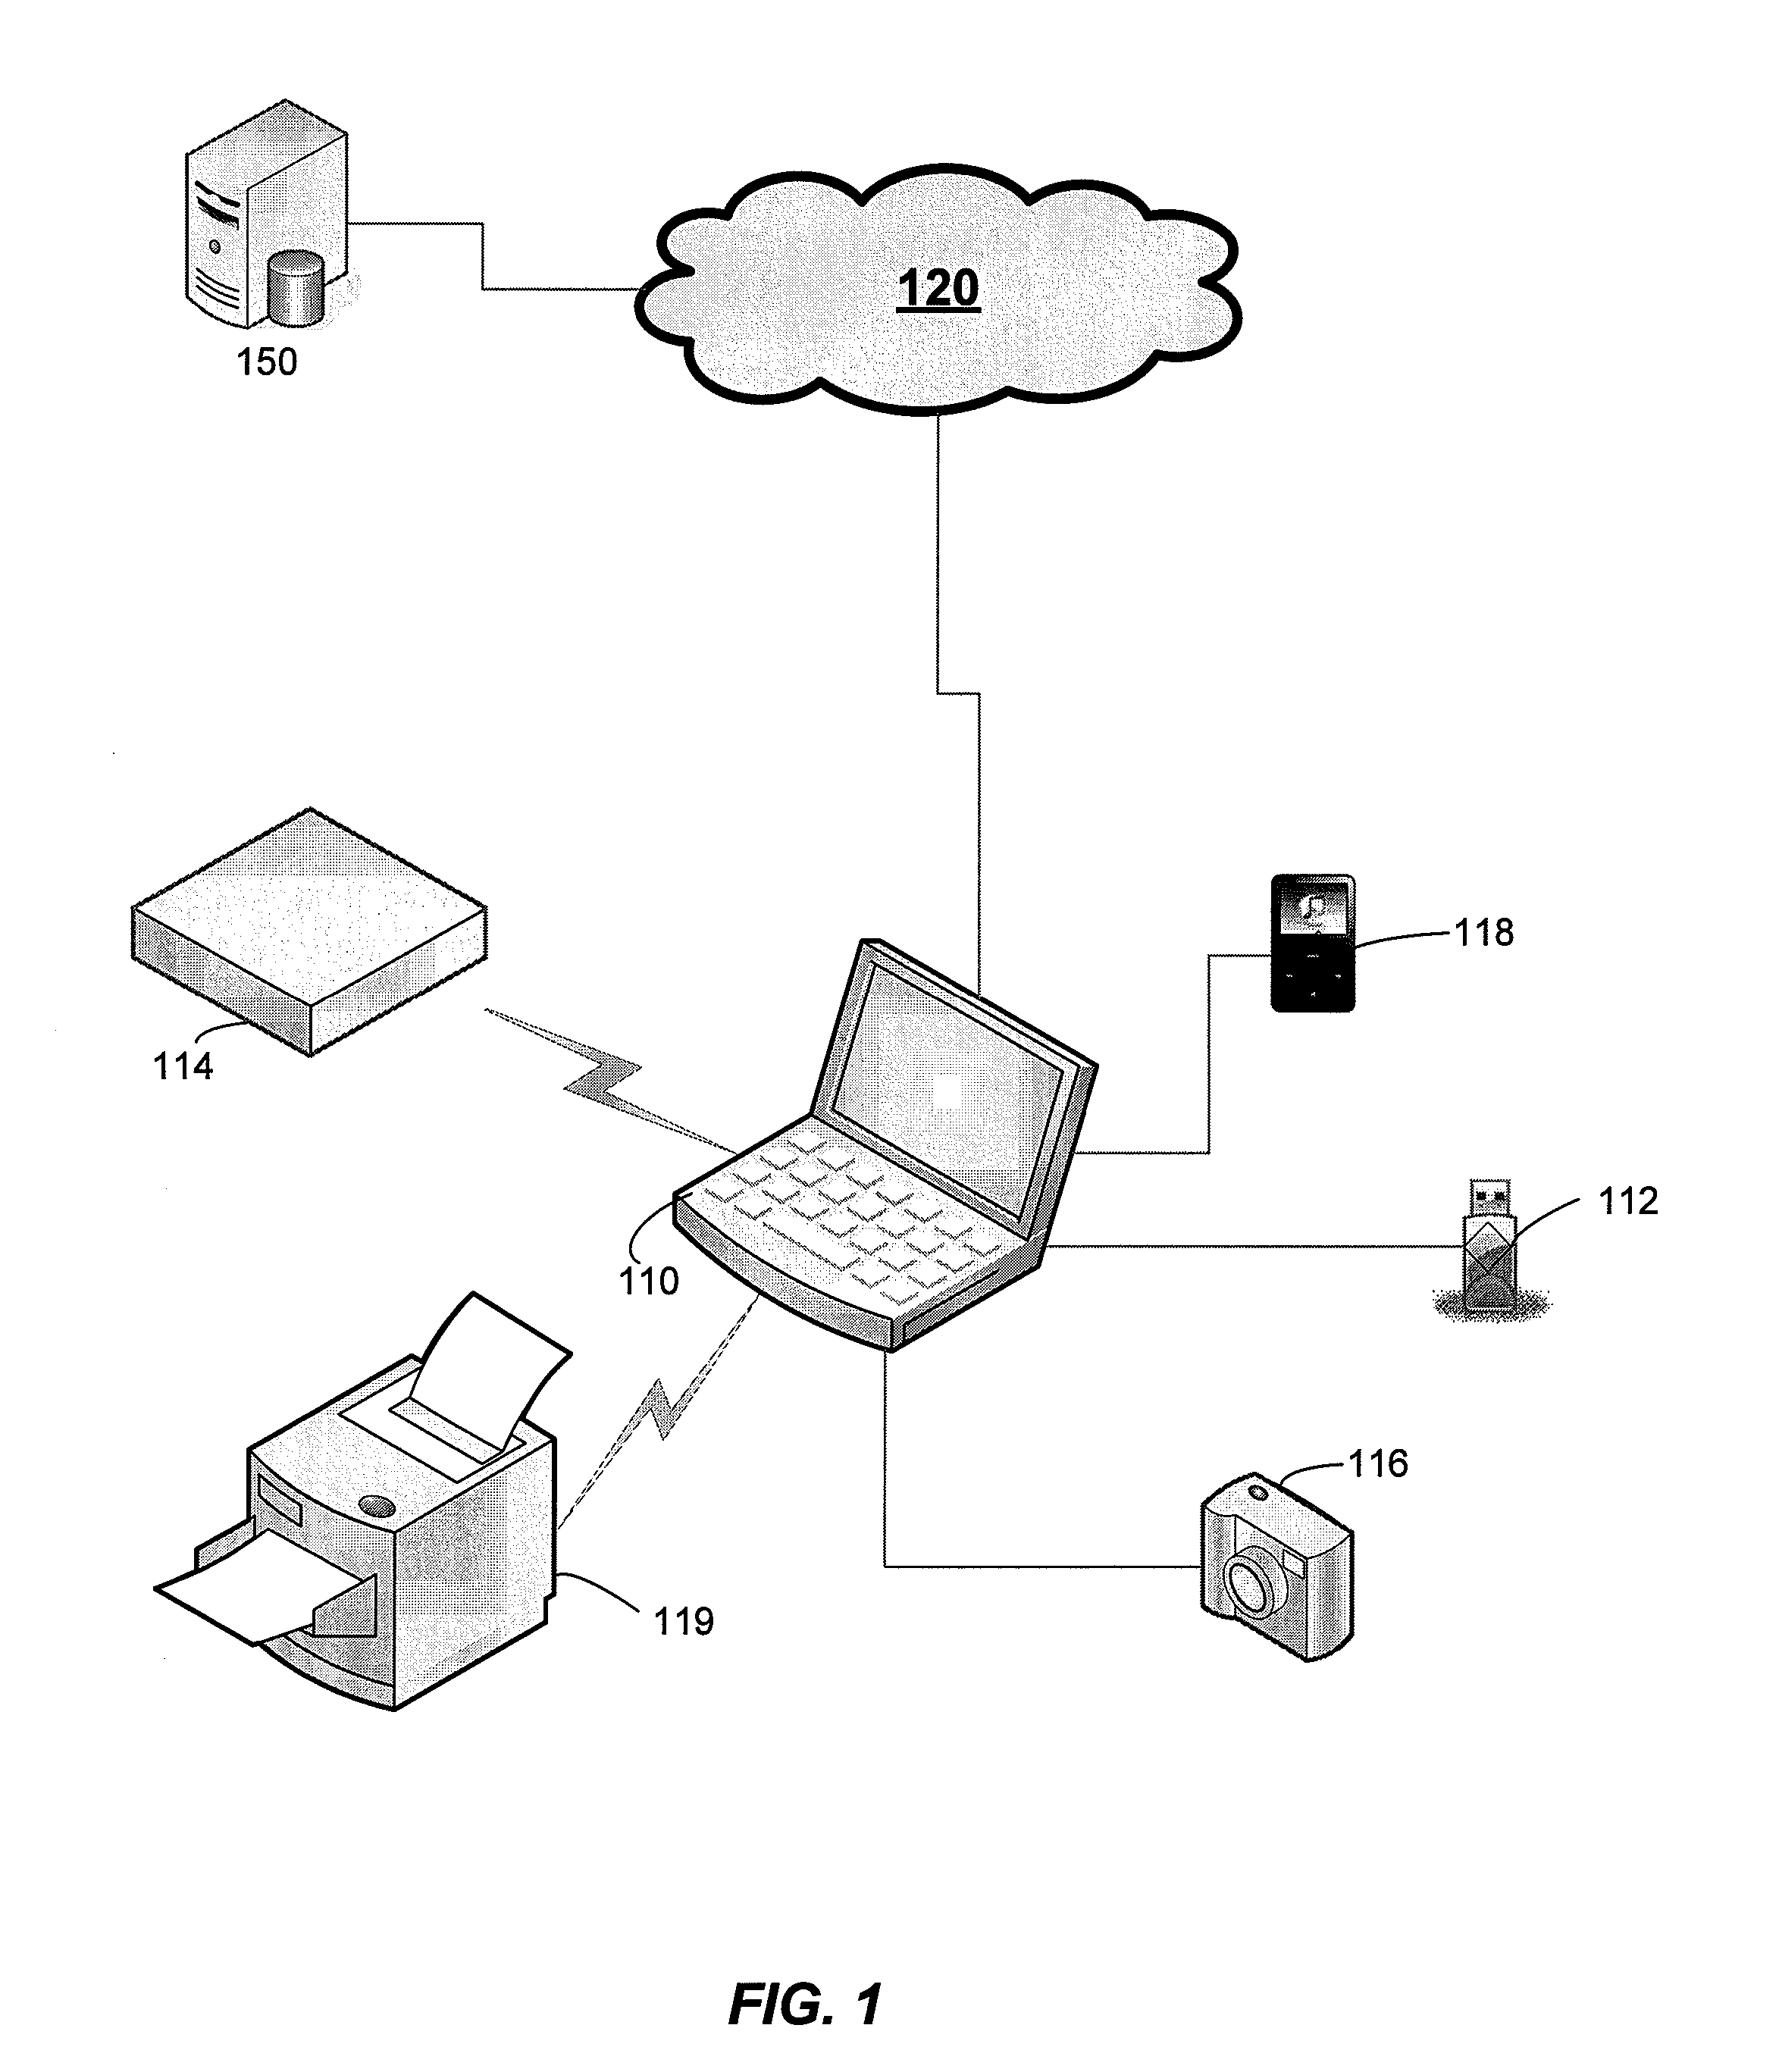 Dynamic device state representation in a user interface